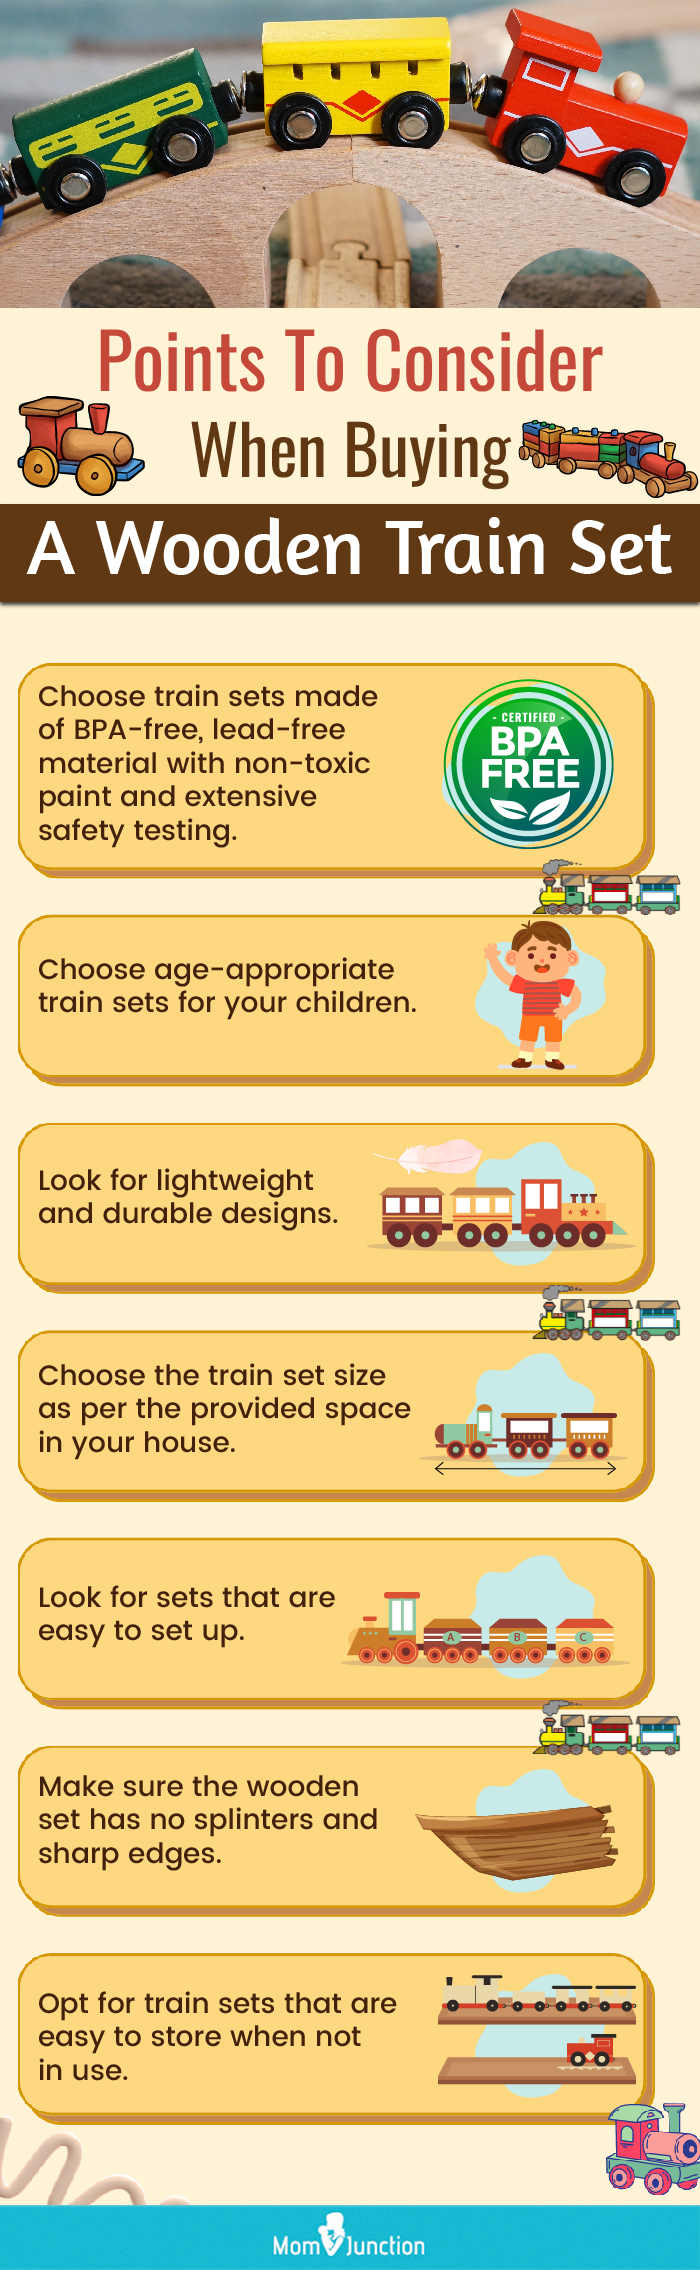 Points To Consider When Buying A Wooden Train Set (infographic)